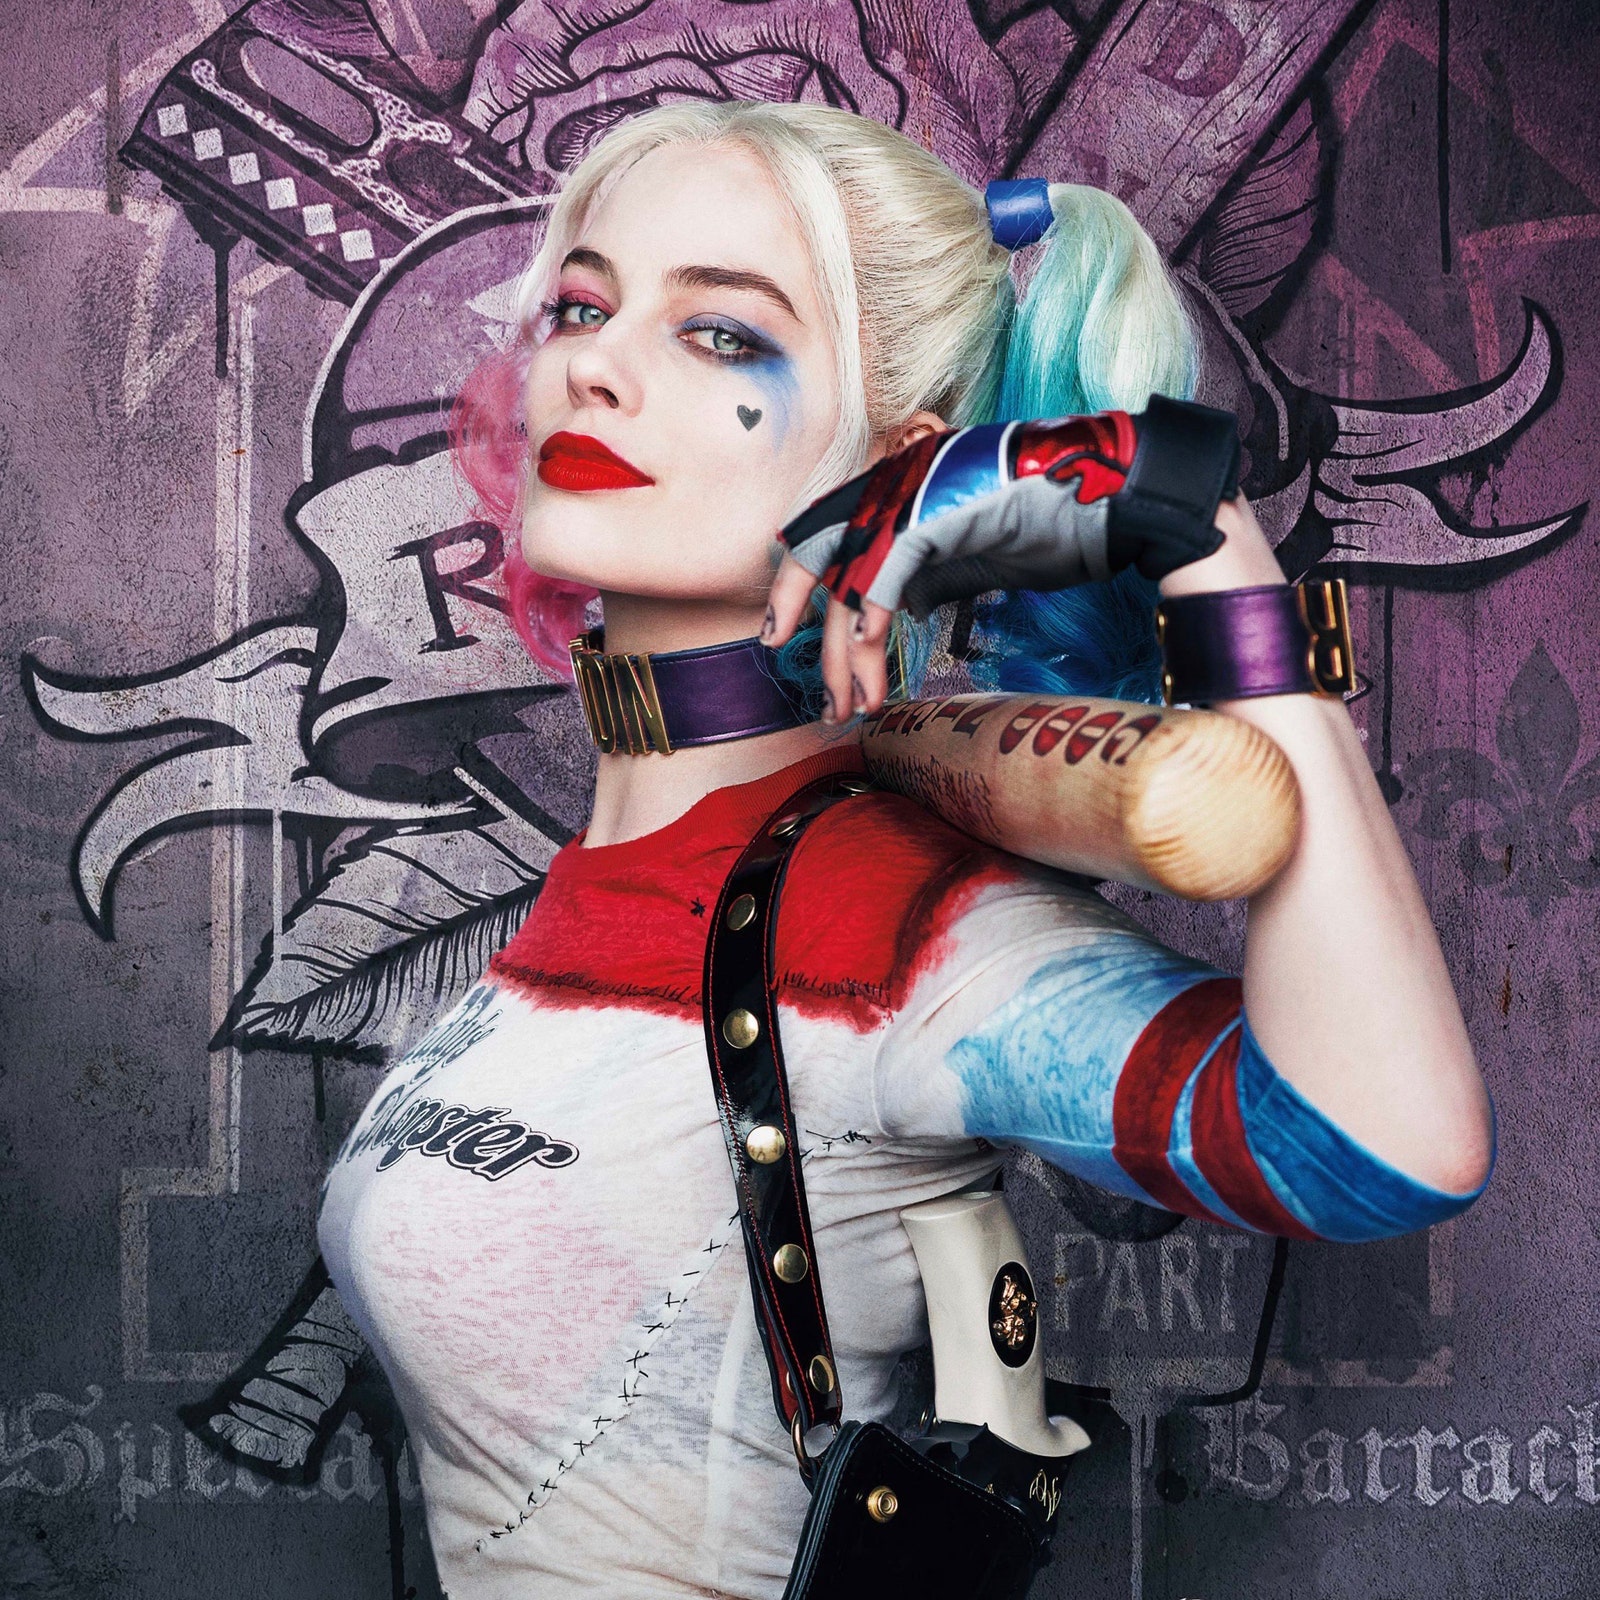 cathy silverman recommends google show me a picture of harley quinn pic